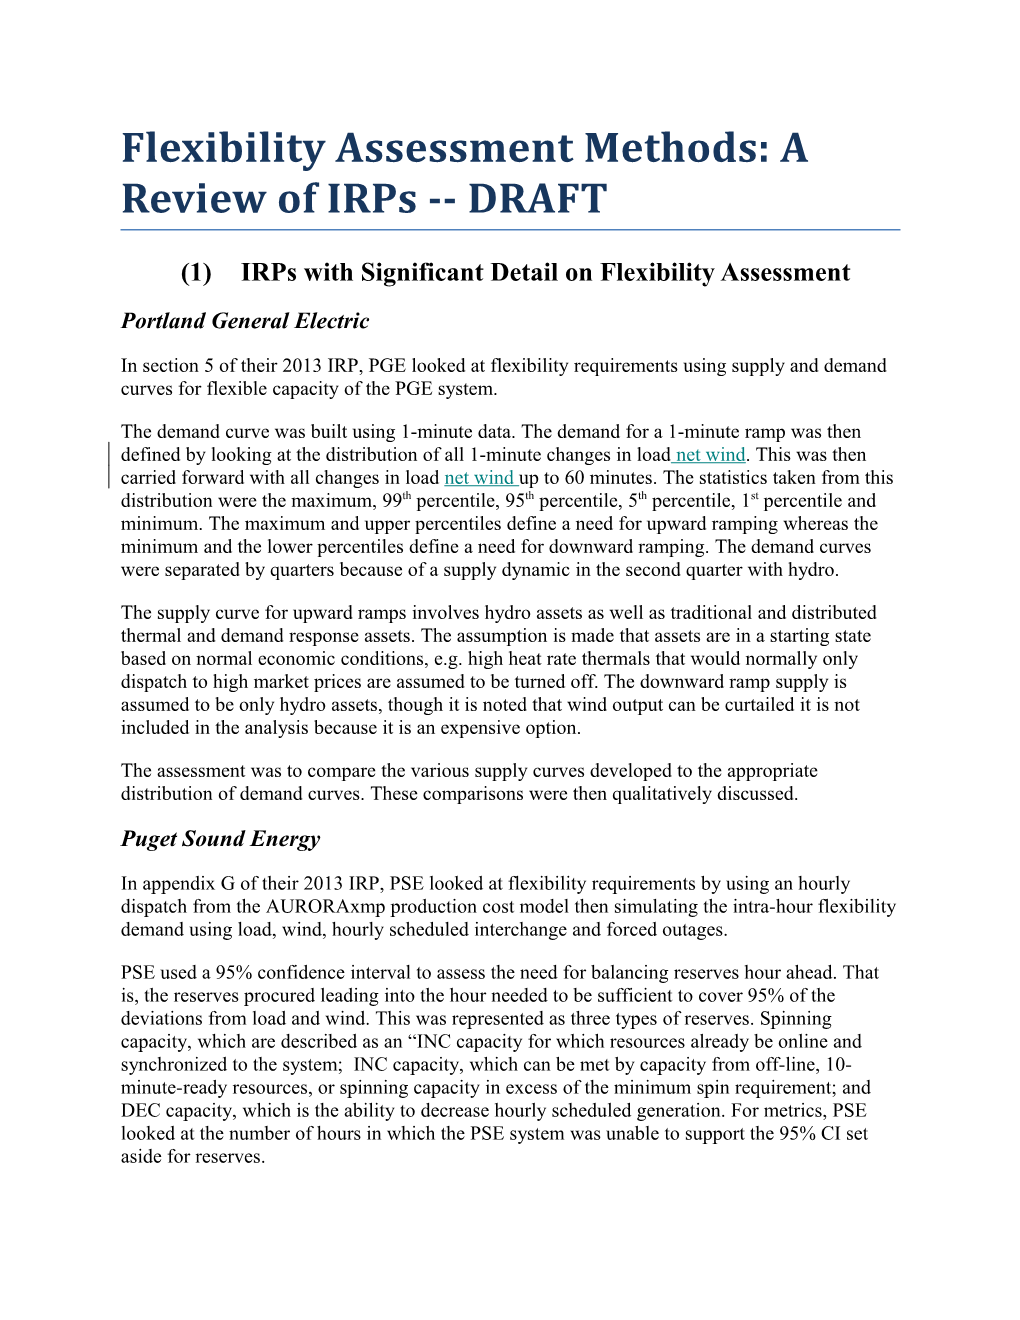 I.Irps with Significant Detail on Flexibility Assessment